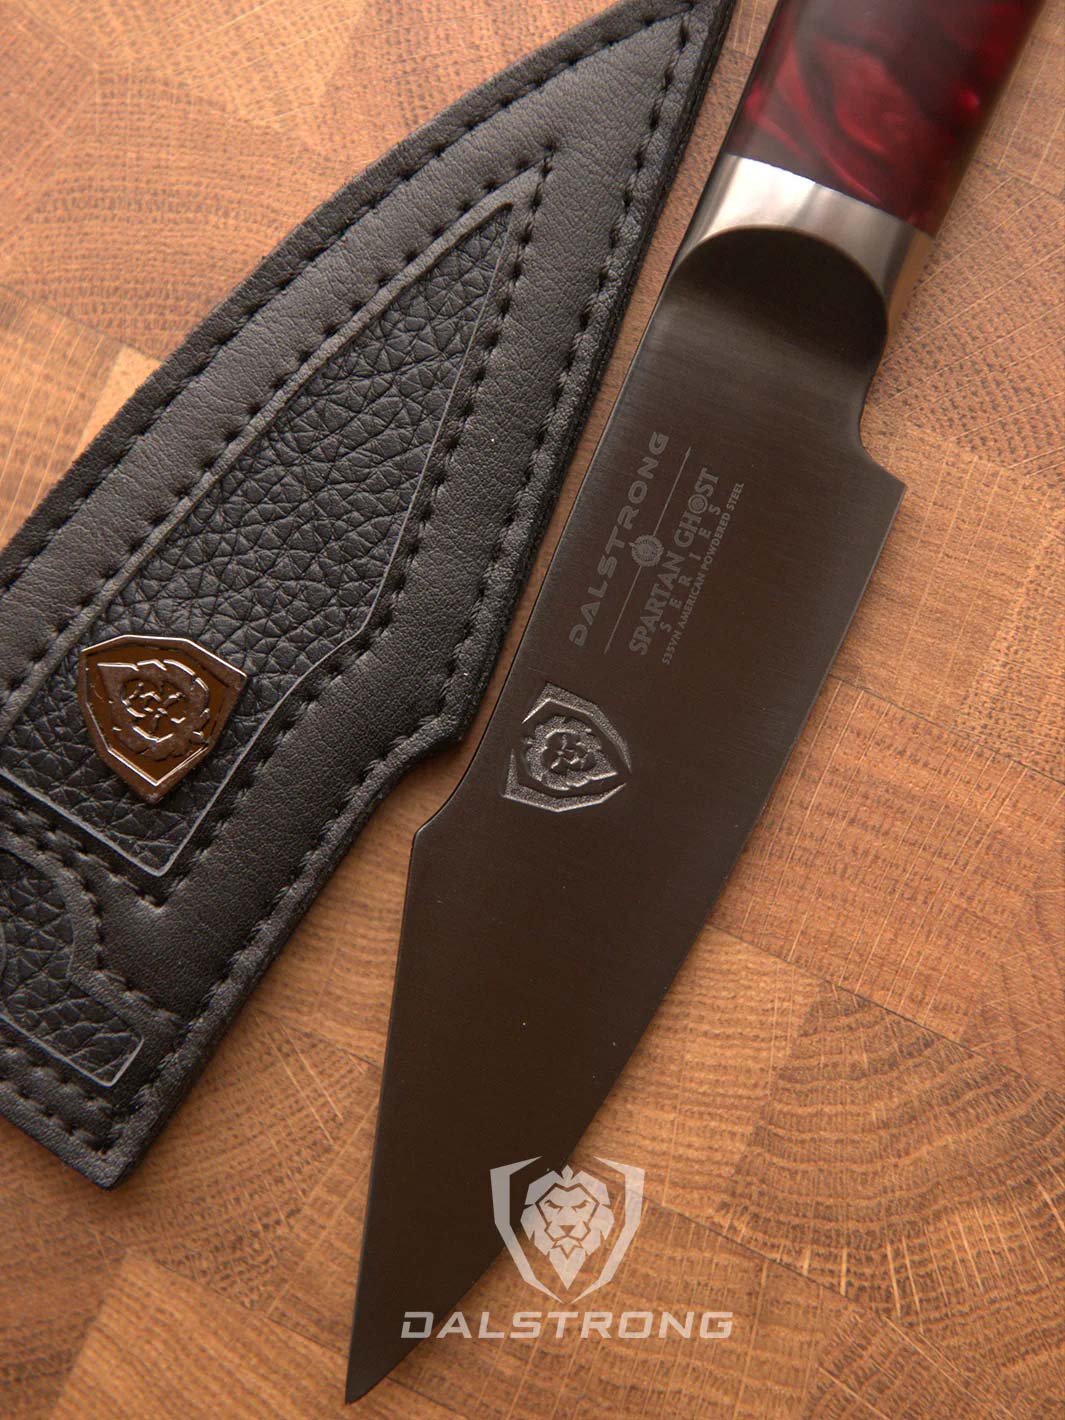 Dalstrong spartan ghost series 4 inch paring knife with wooden handle beside it's sheath.